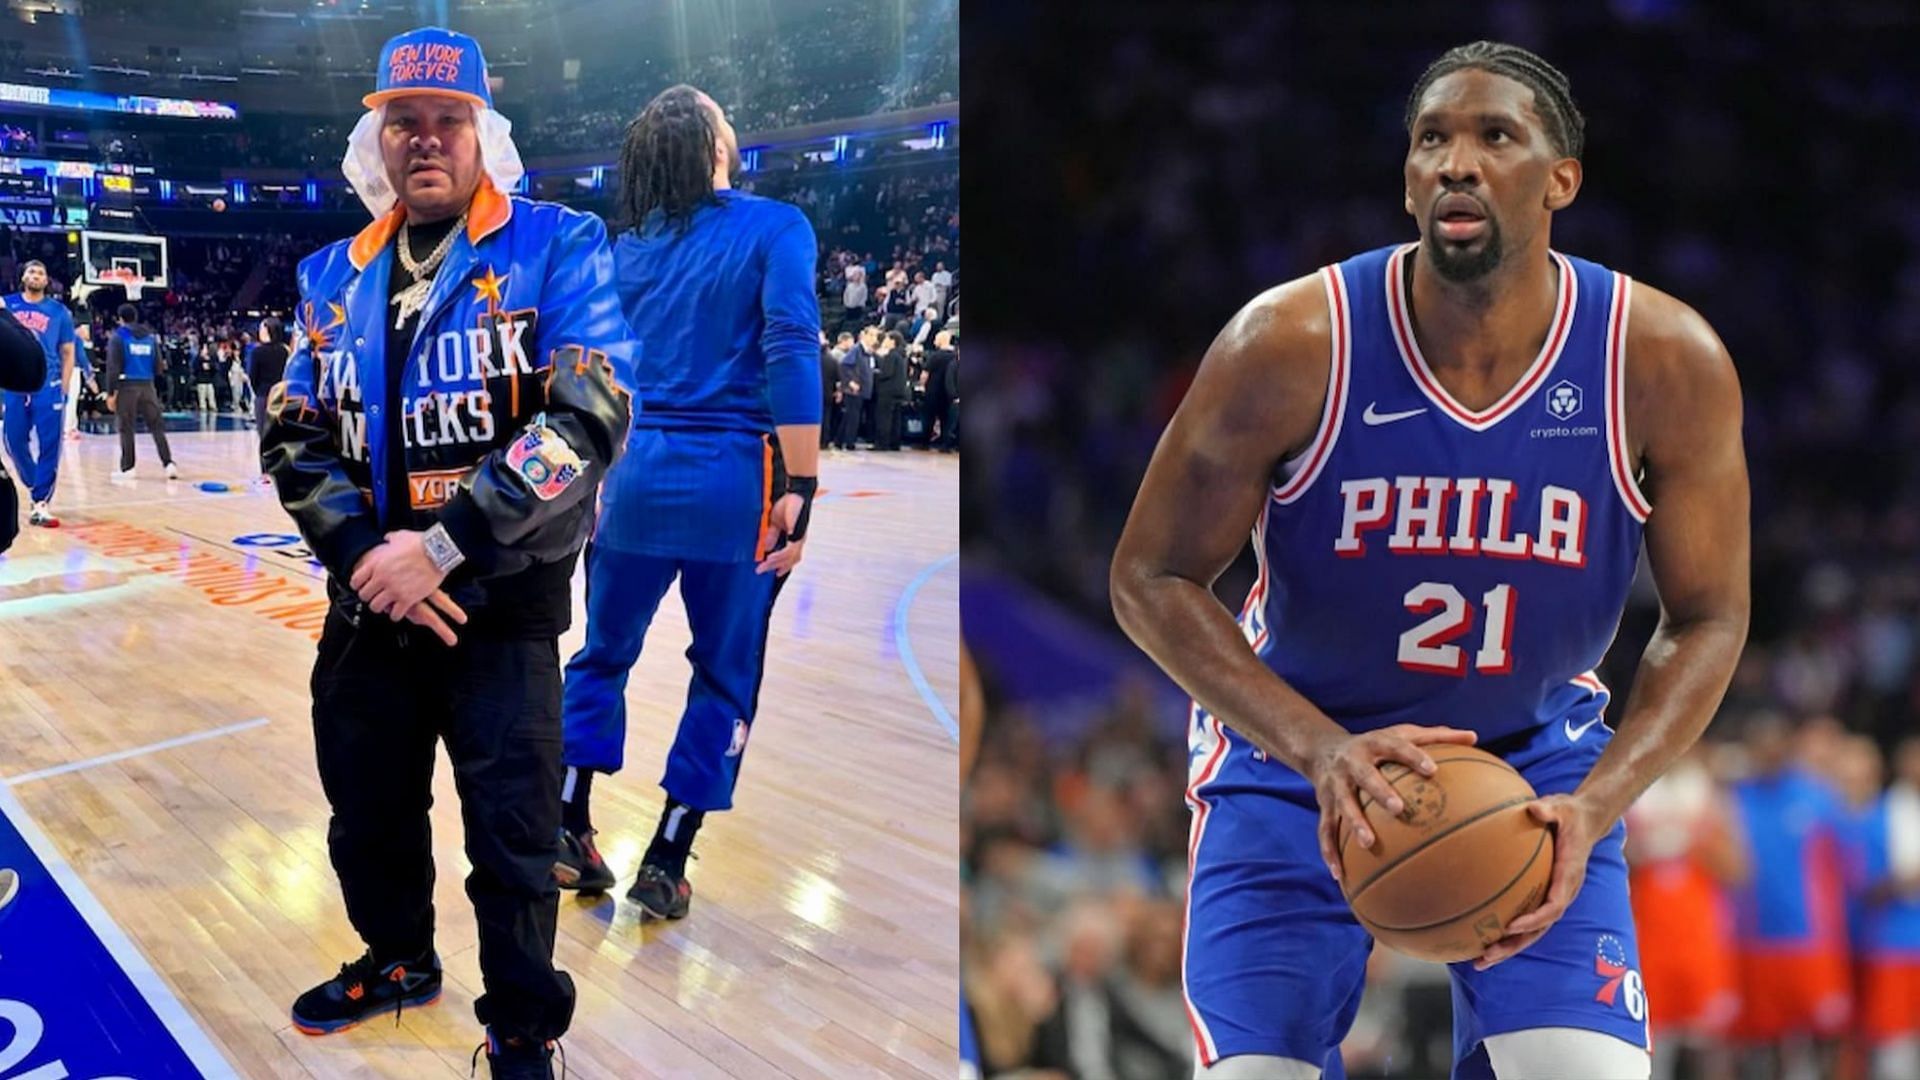 Fat Joe takes a dig at Joel Embiid prior to Sixers vs Knicks Game 5 tip-off